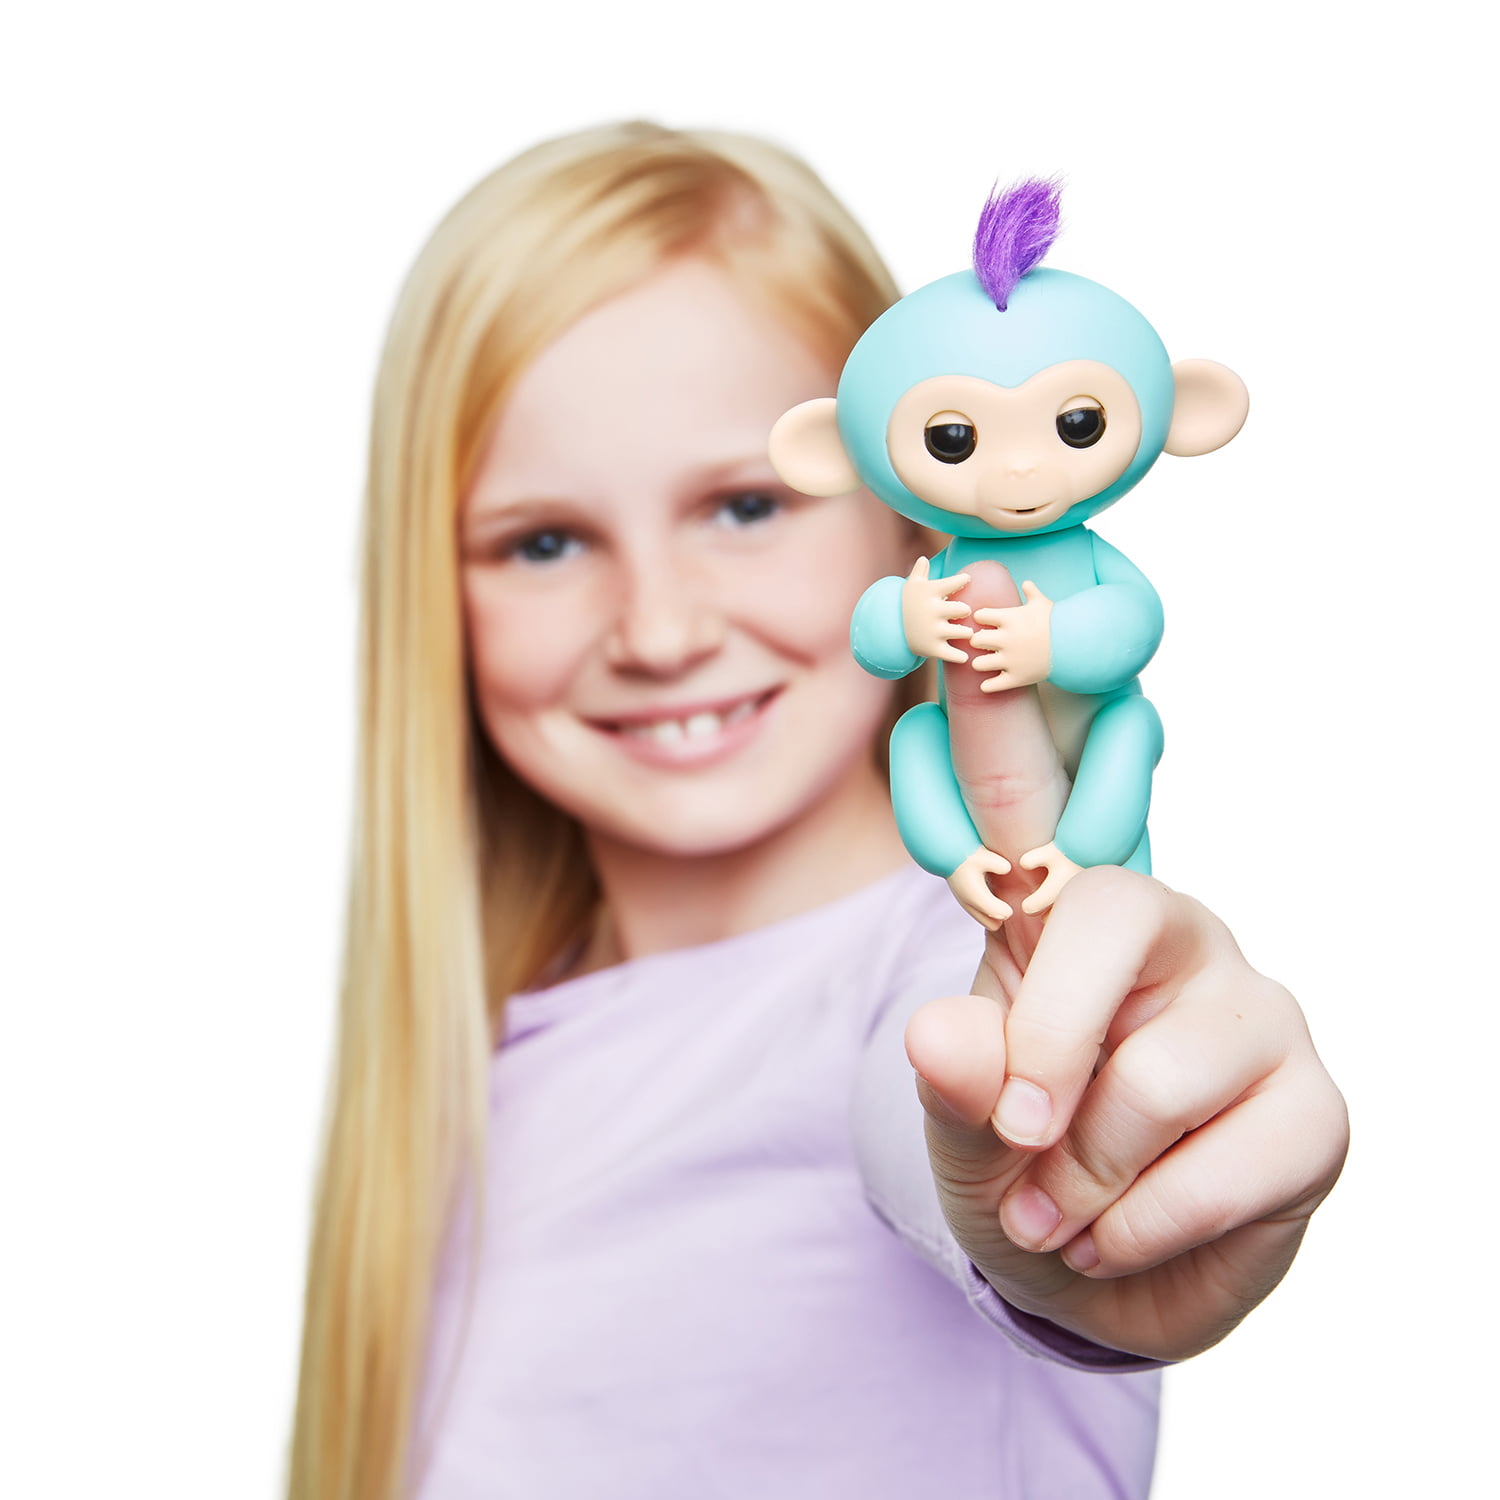 WowWee Fingerlings Zoe Baby Monkey Interactive Toy 100 Authentic Turquoise for sale online